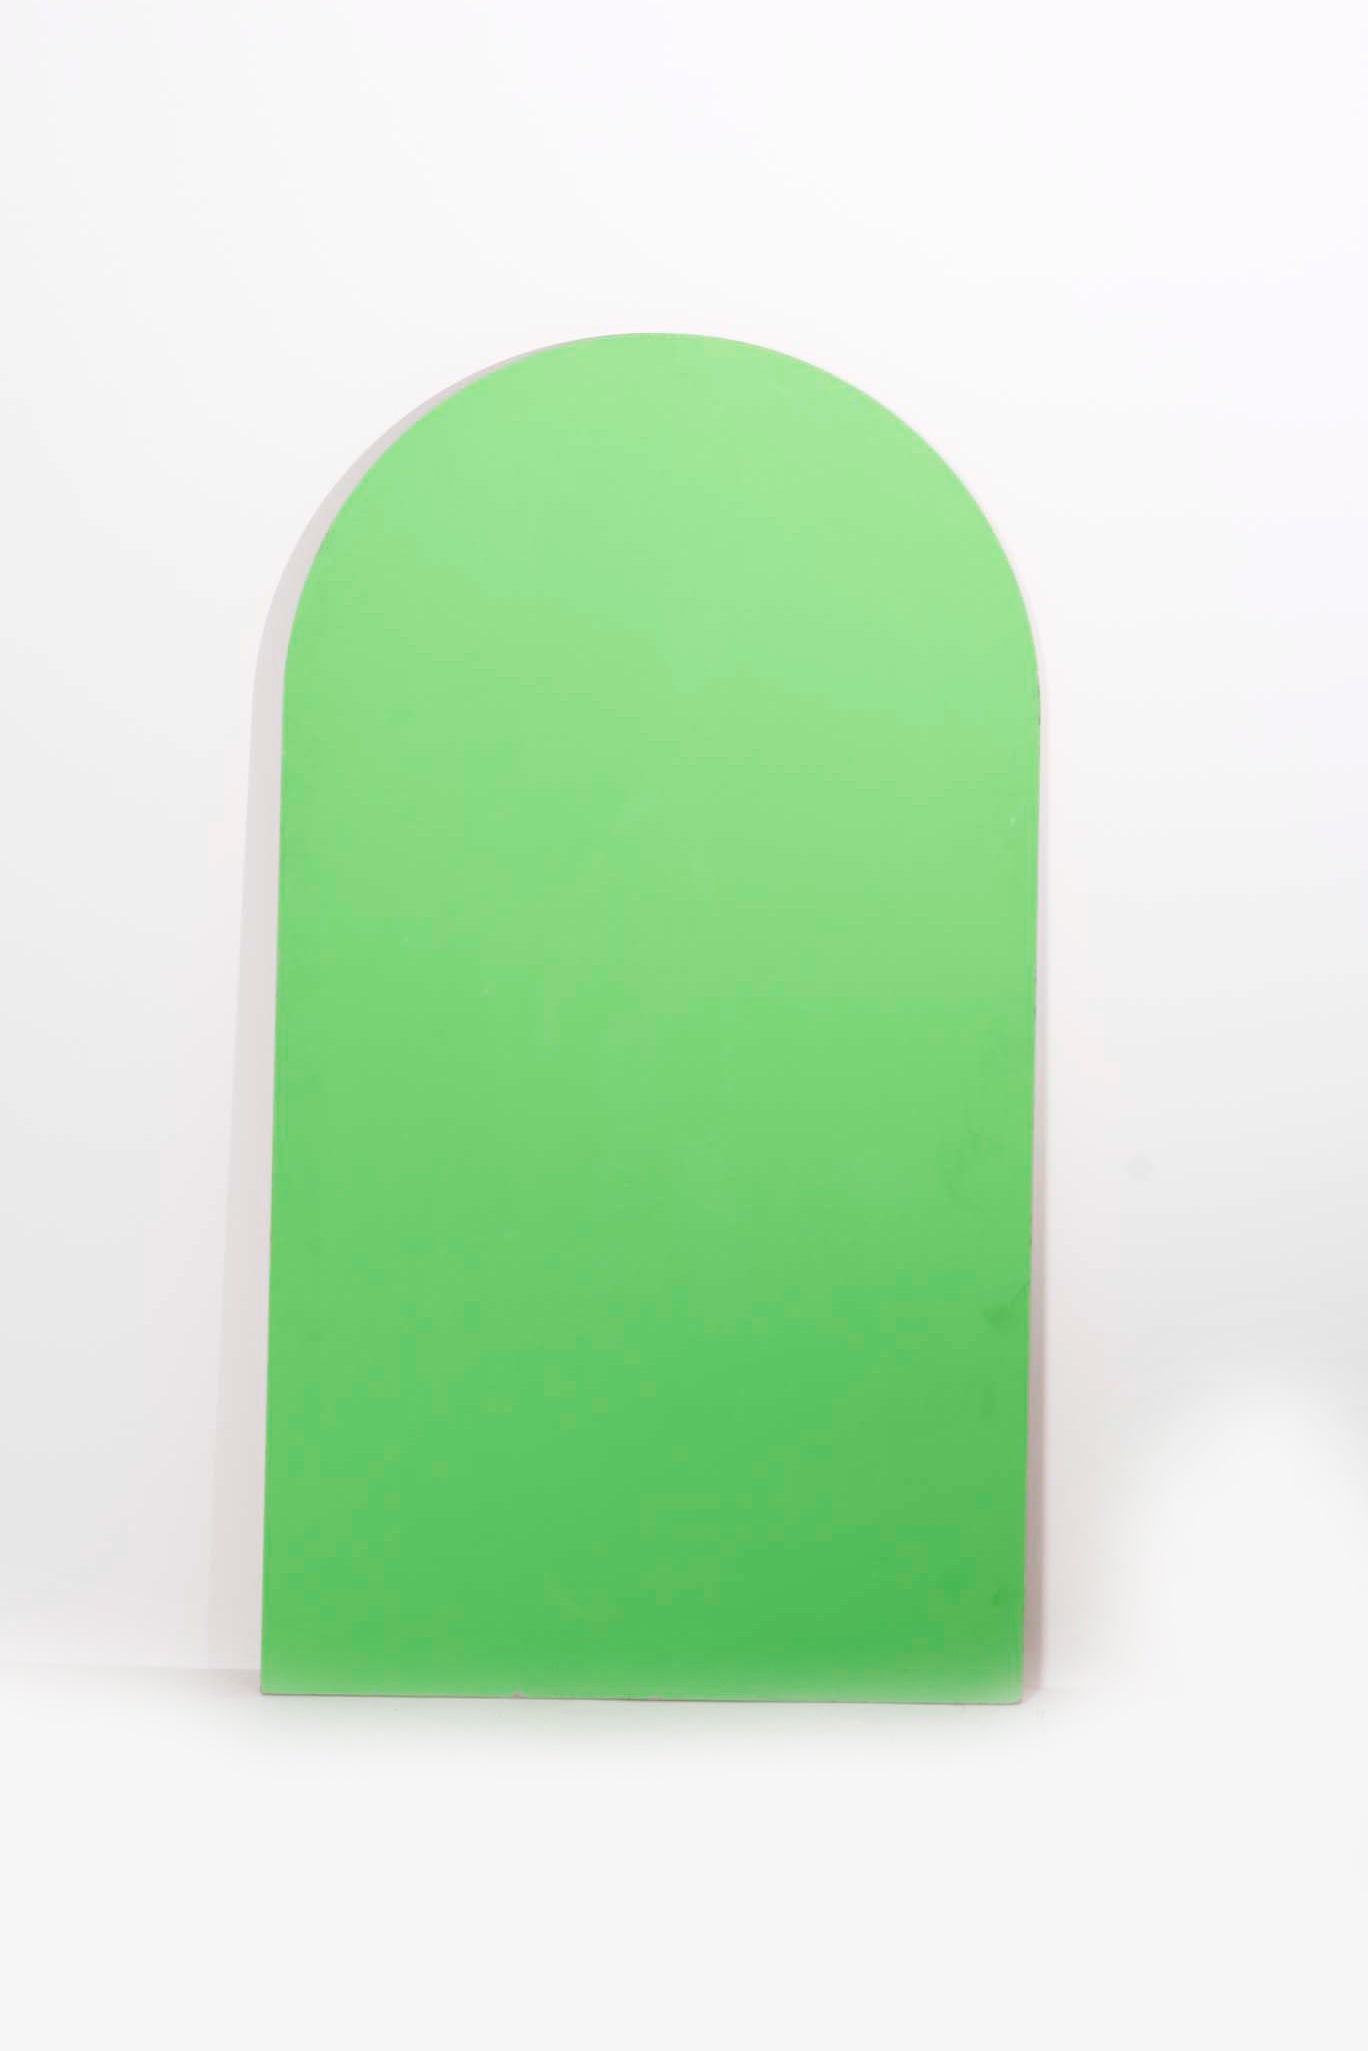 Large MDF Reversible Coloured Boards (8pcs)